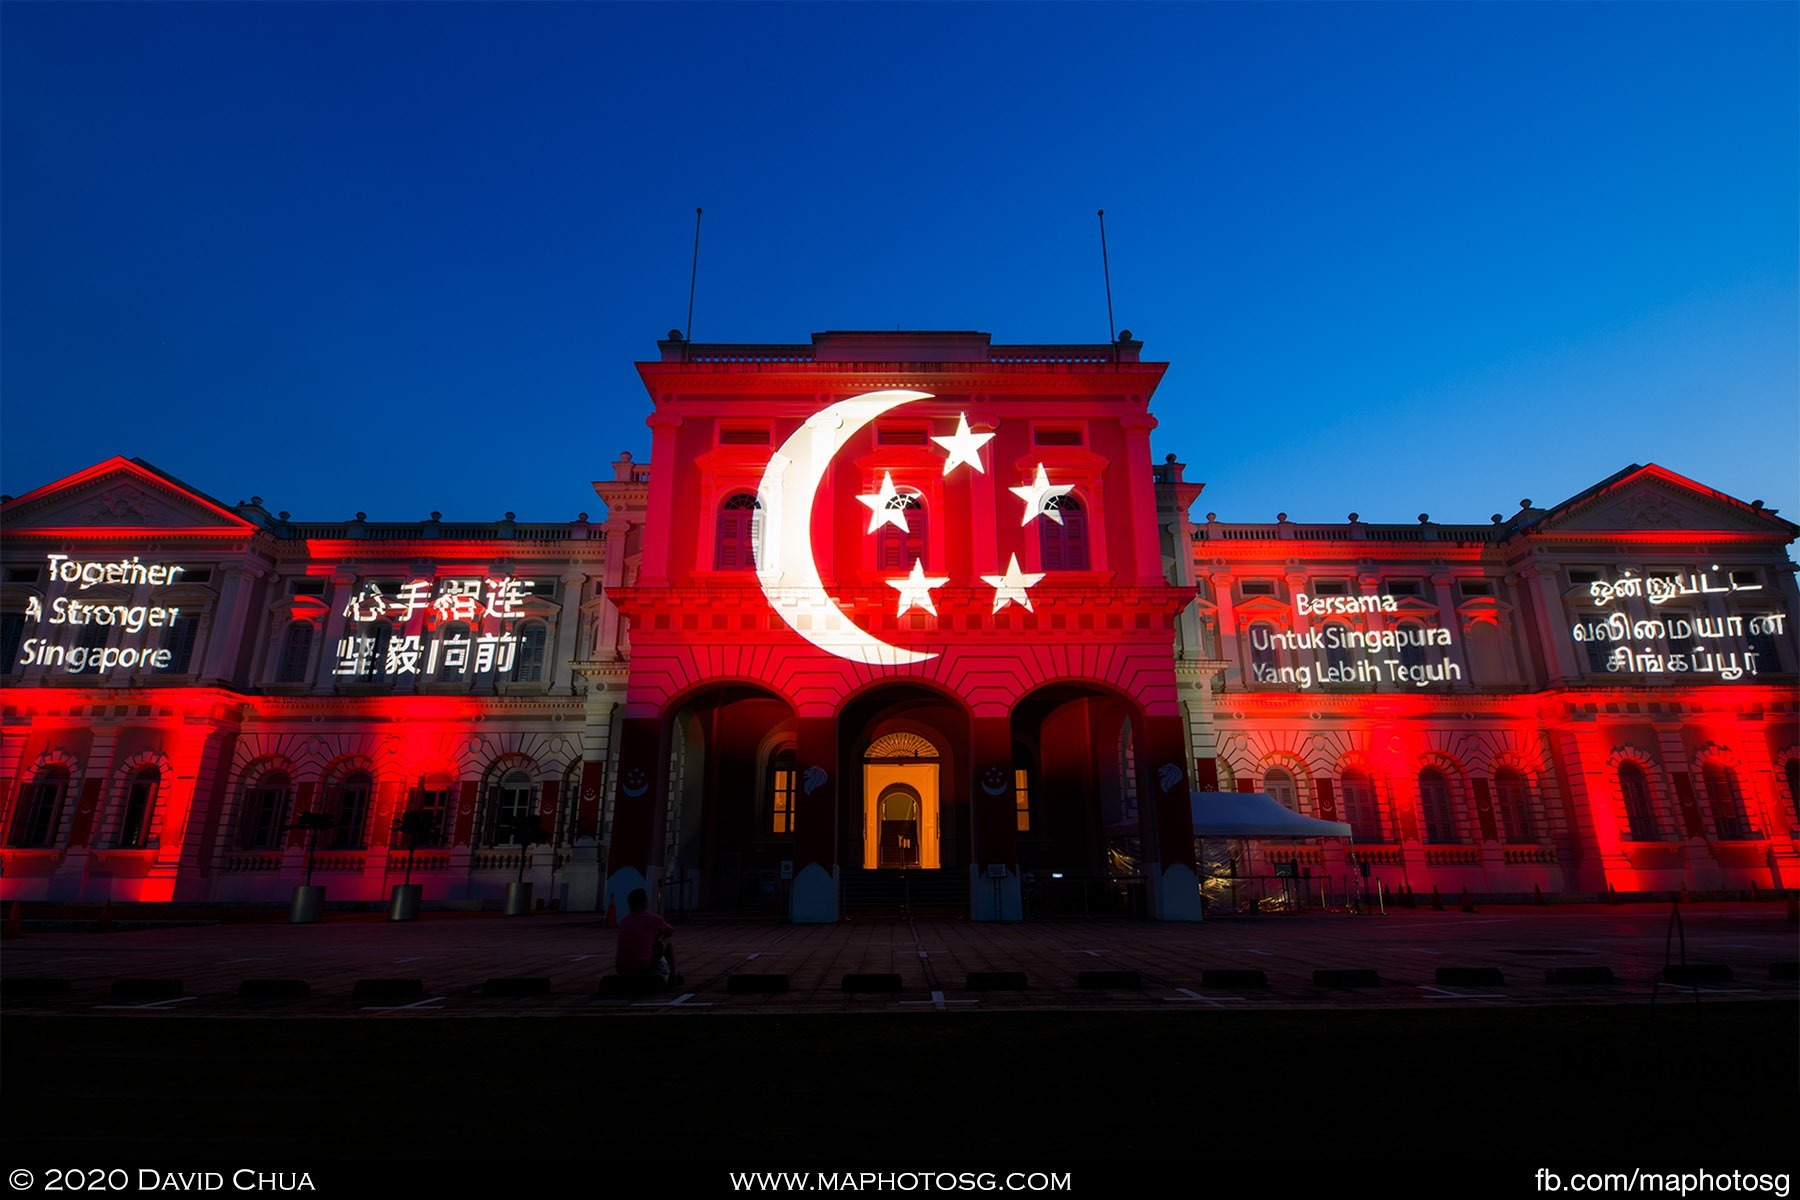 The National Museum of Singapore is lighted up with a National Day Facade Projection till the end of August.